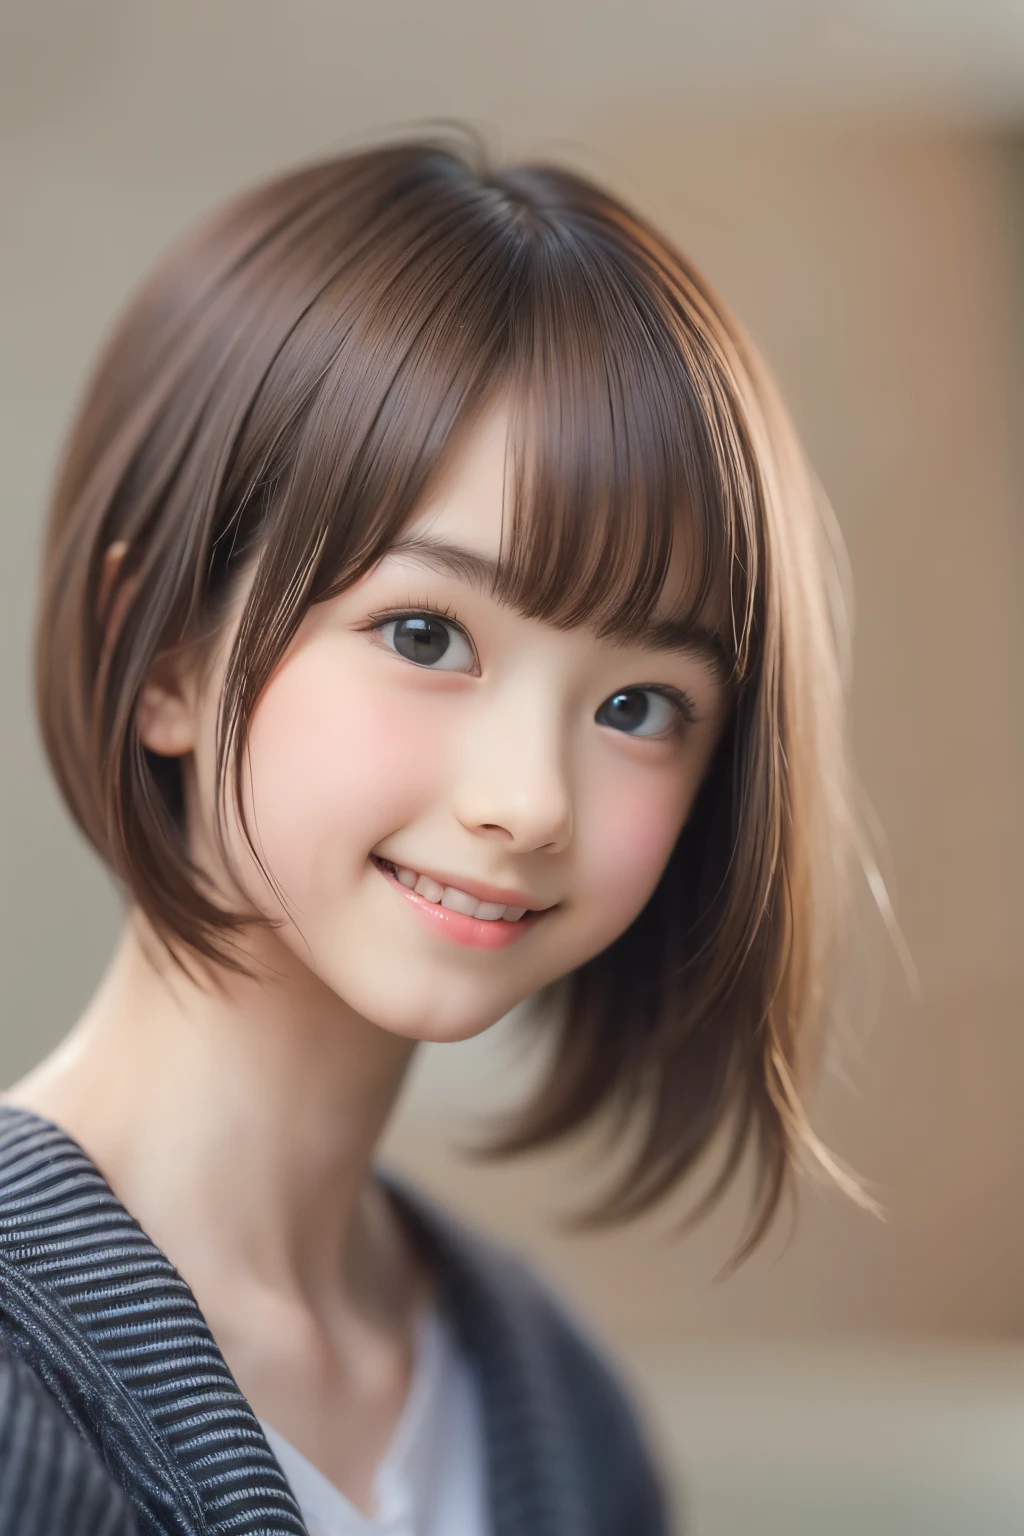 ((sfw: 1.4)), ((sfw, short hair, sidelocks-hair, light smile, 1 Girl)), Ultra High Resolution, (Realistic: 1.4), RAW Photo, Best Quality, (Photorealistic Stick), Focus, Soft Light, ((15 years old)), ((Japanese)), (( (young face))), (surface), (depth of field), masterpiece, (realistic), woman, bangs, ((1 girl))